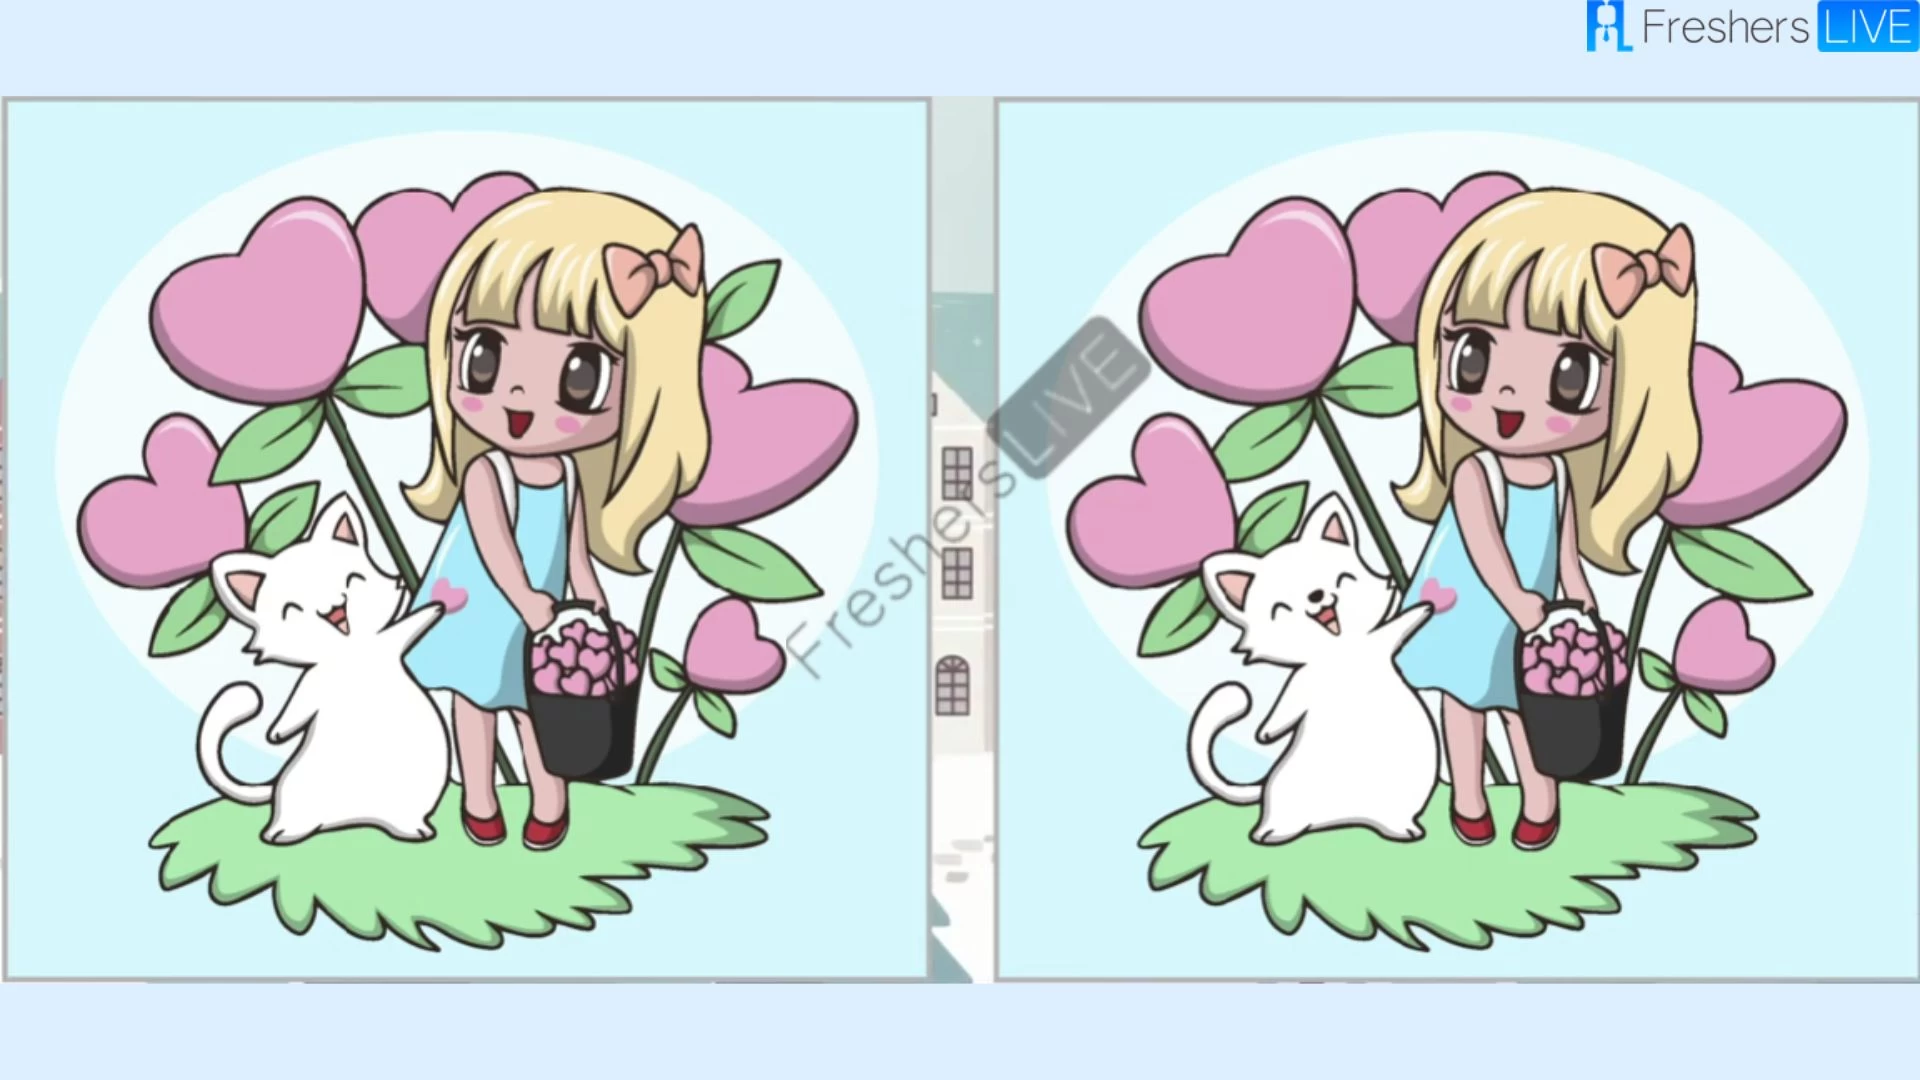 You have Extra Sharp Eyes If You Can Spot the 3 Differences In This Girl Image